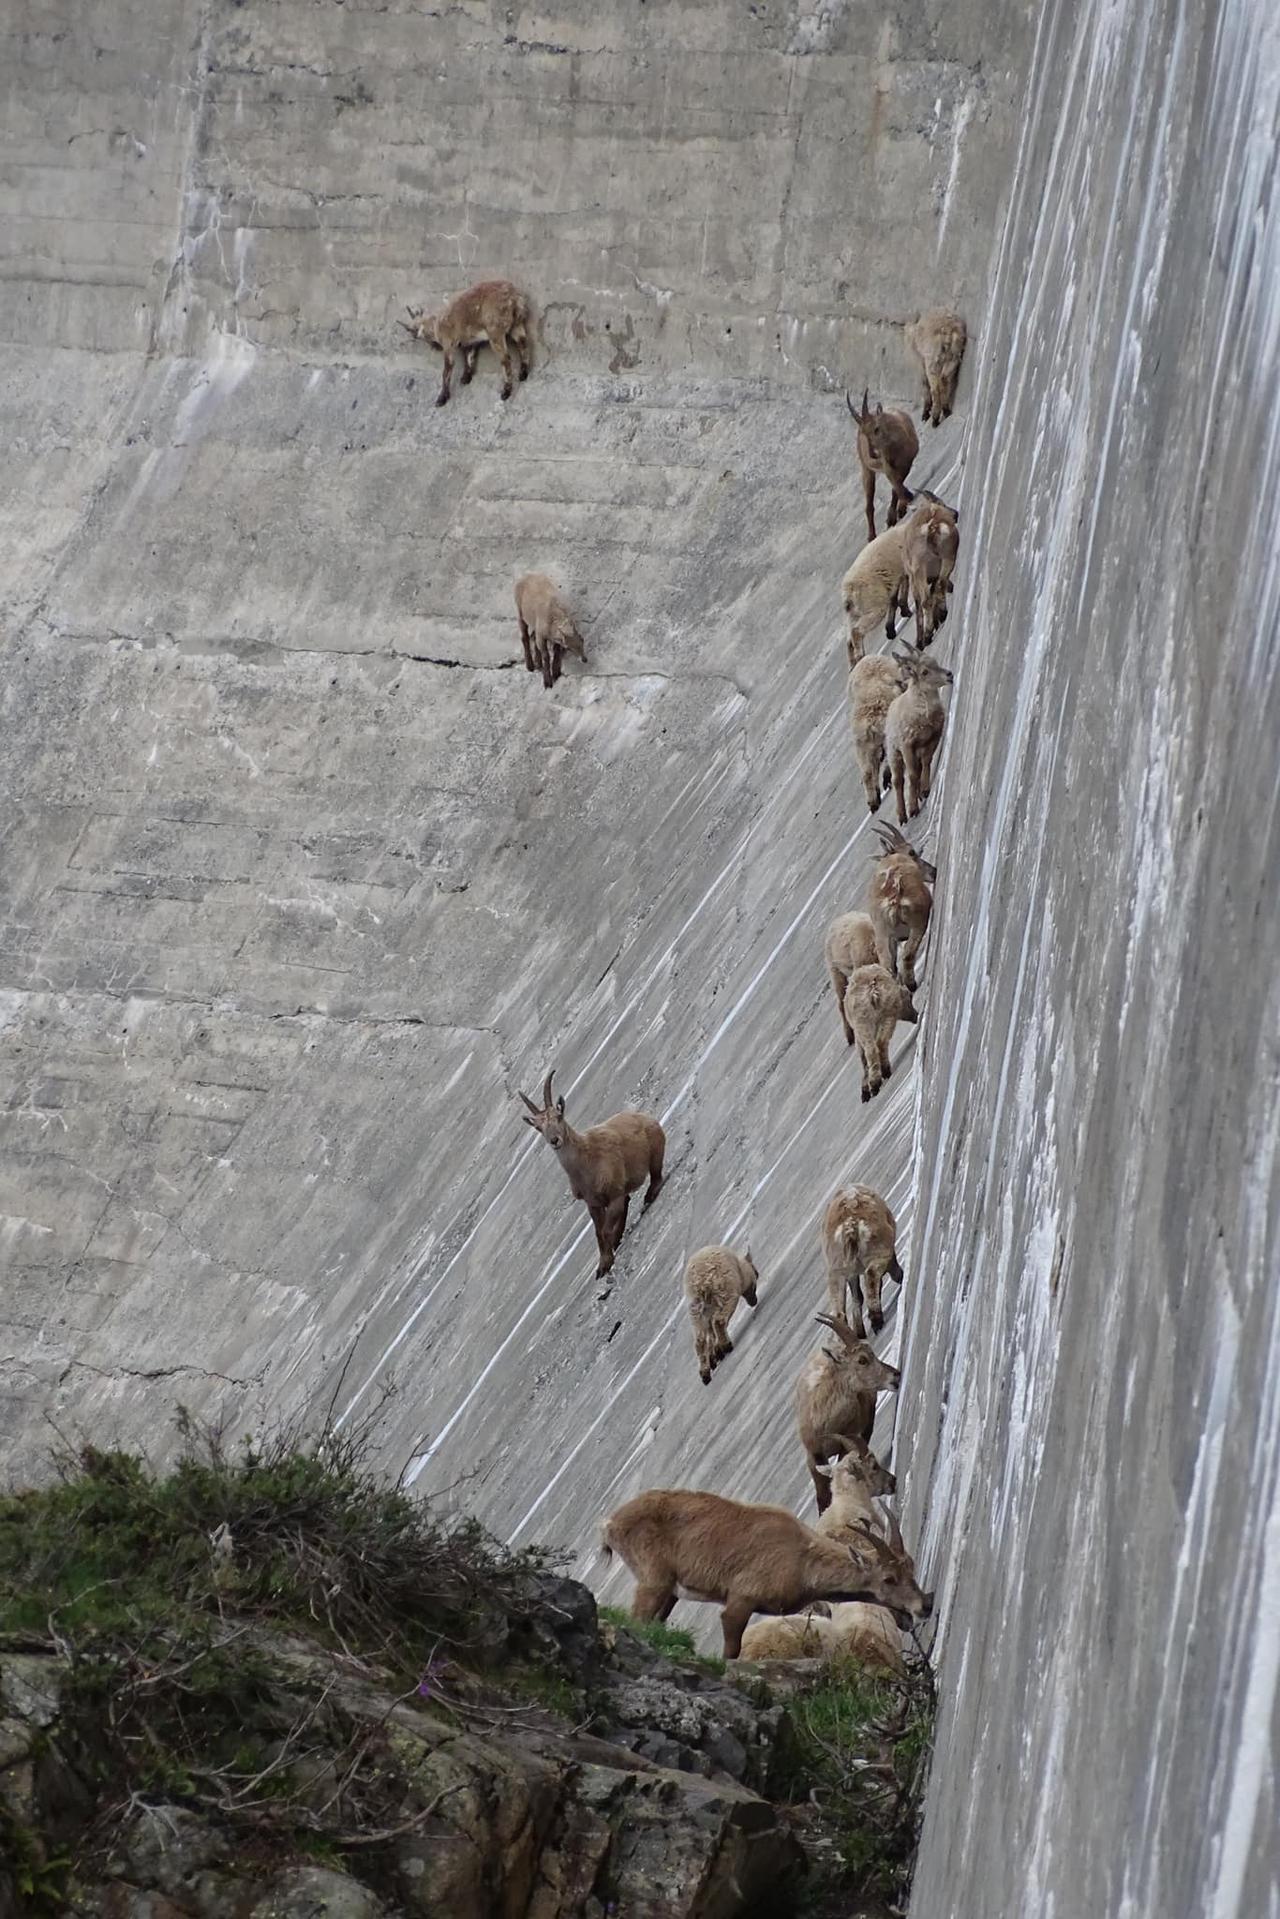 The steepness of the Salanfe dam does not frighten off the herd of ibexes